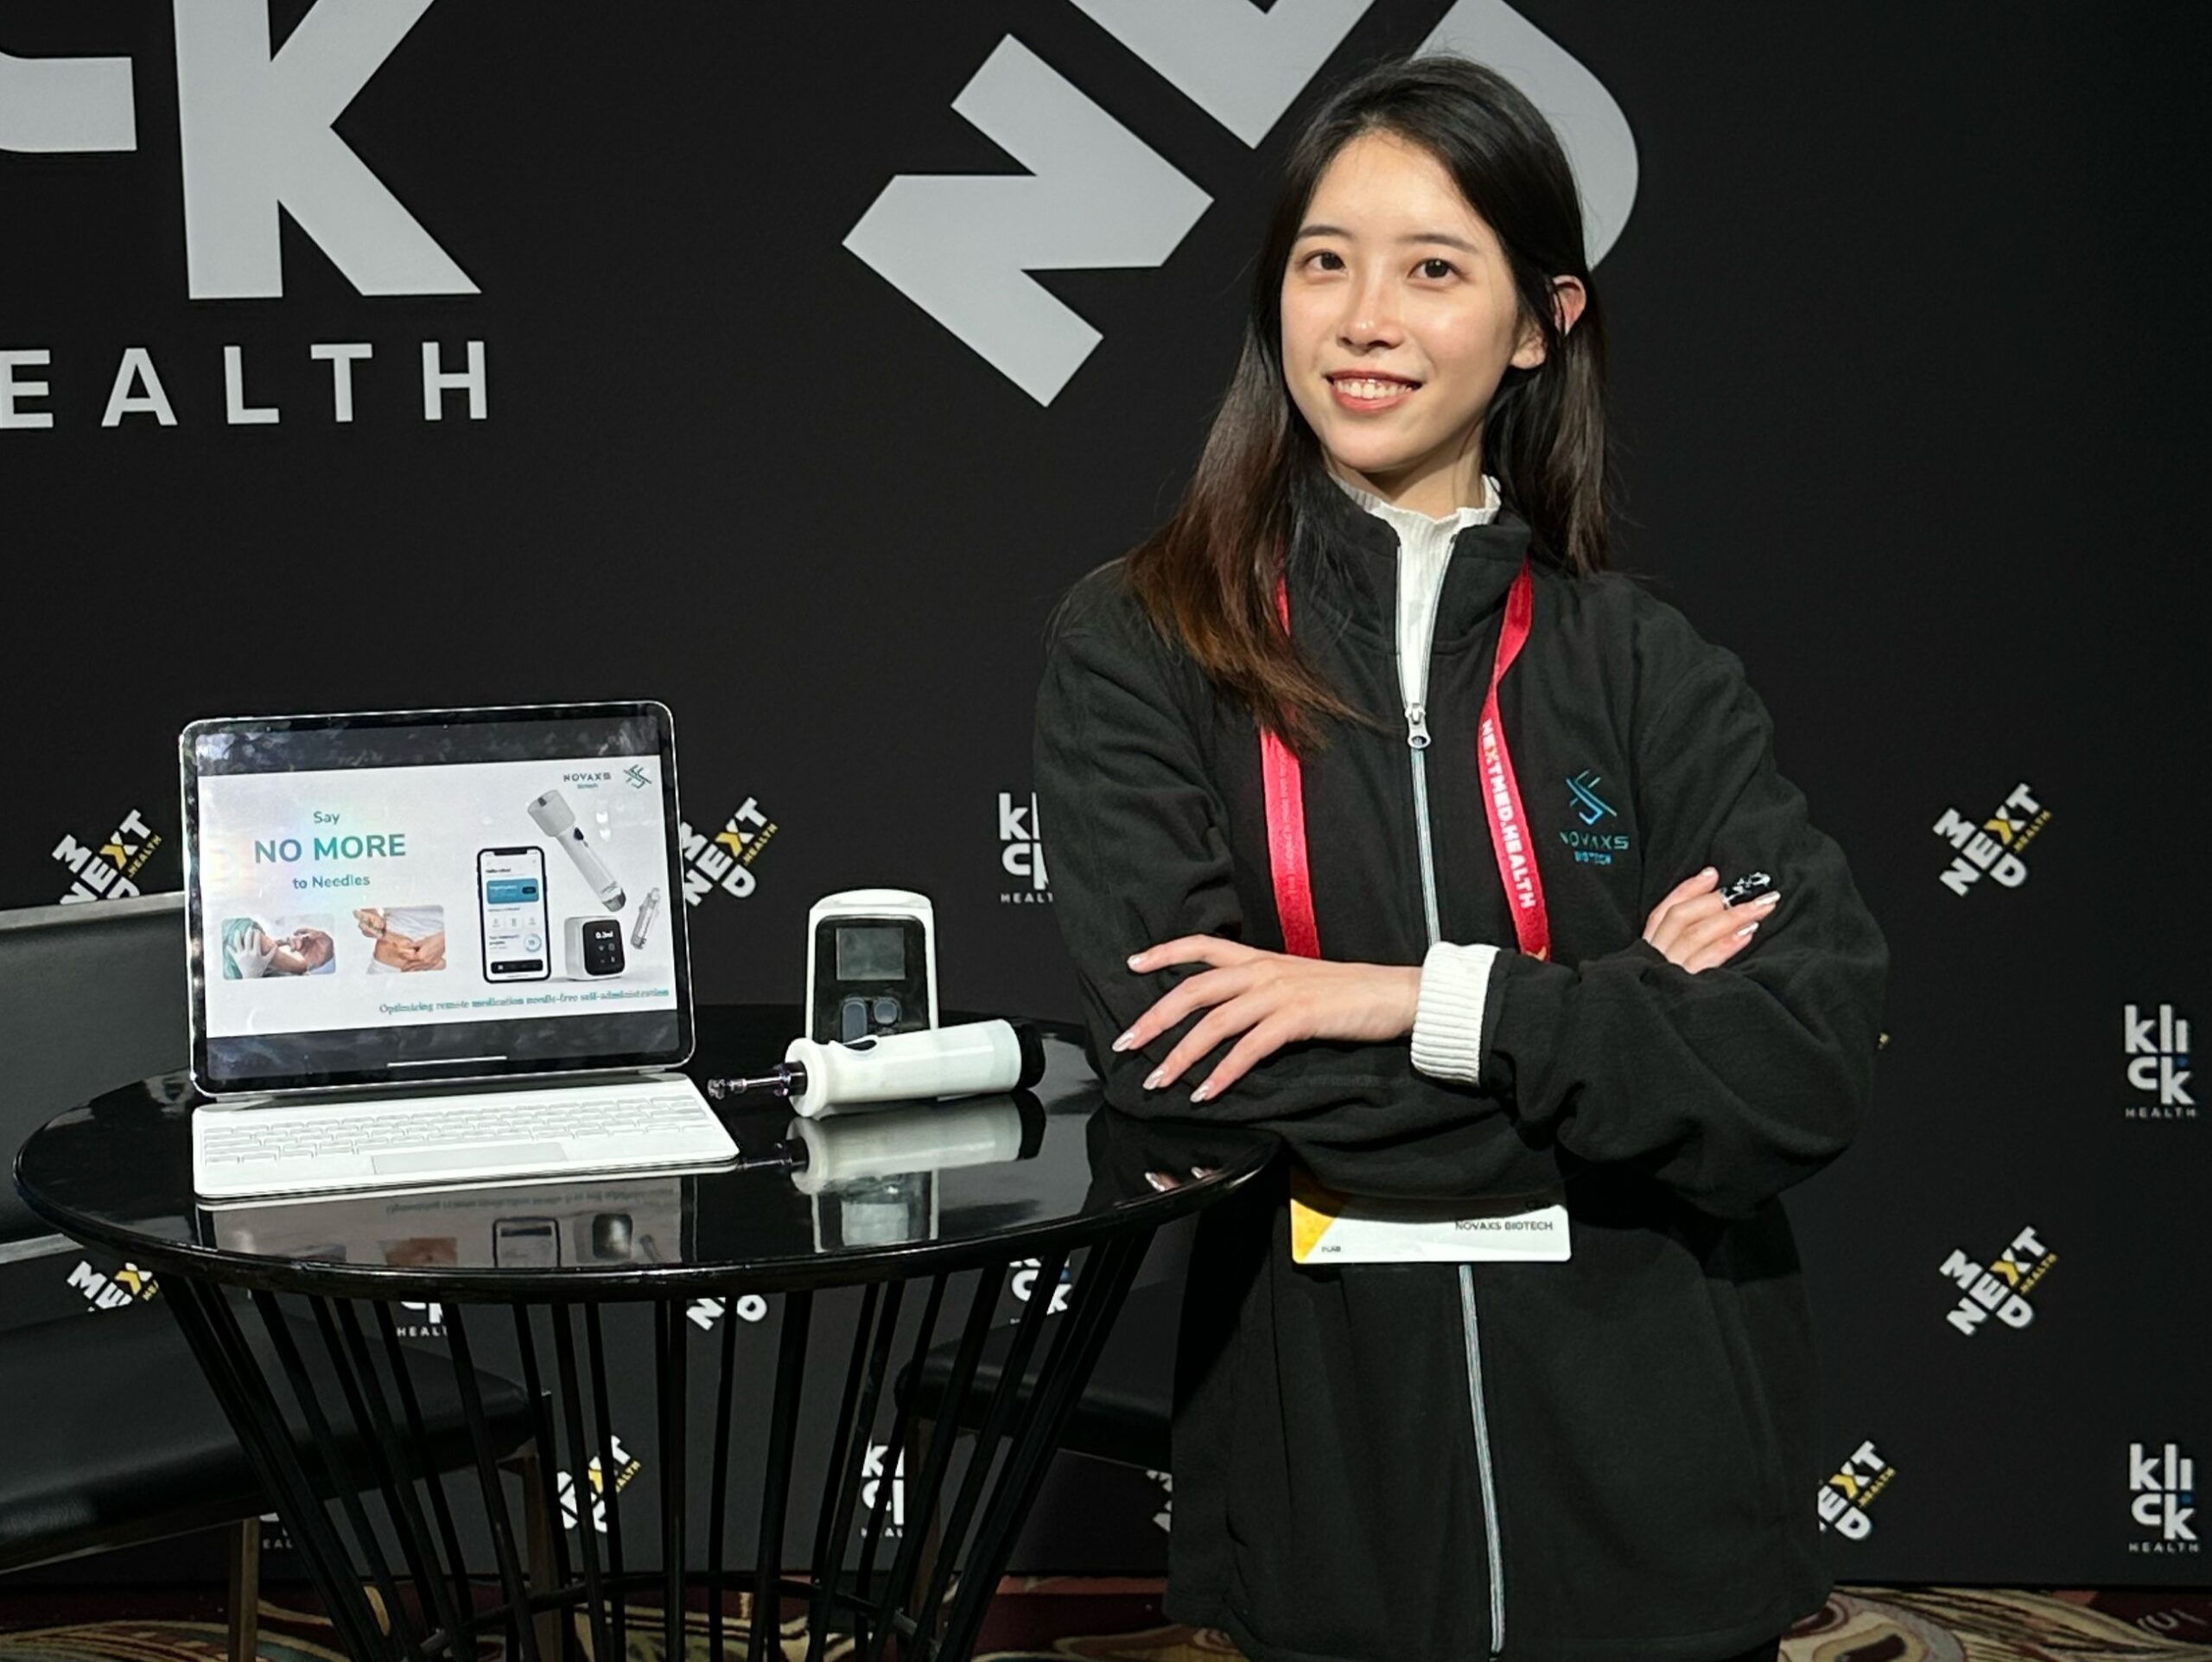 Alina Su stands next to a table with a laptop and medical device on it